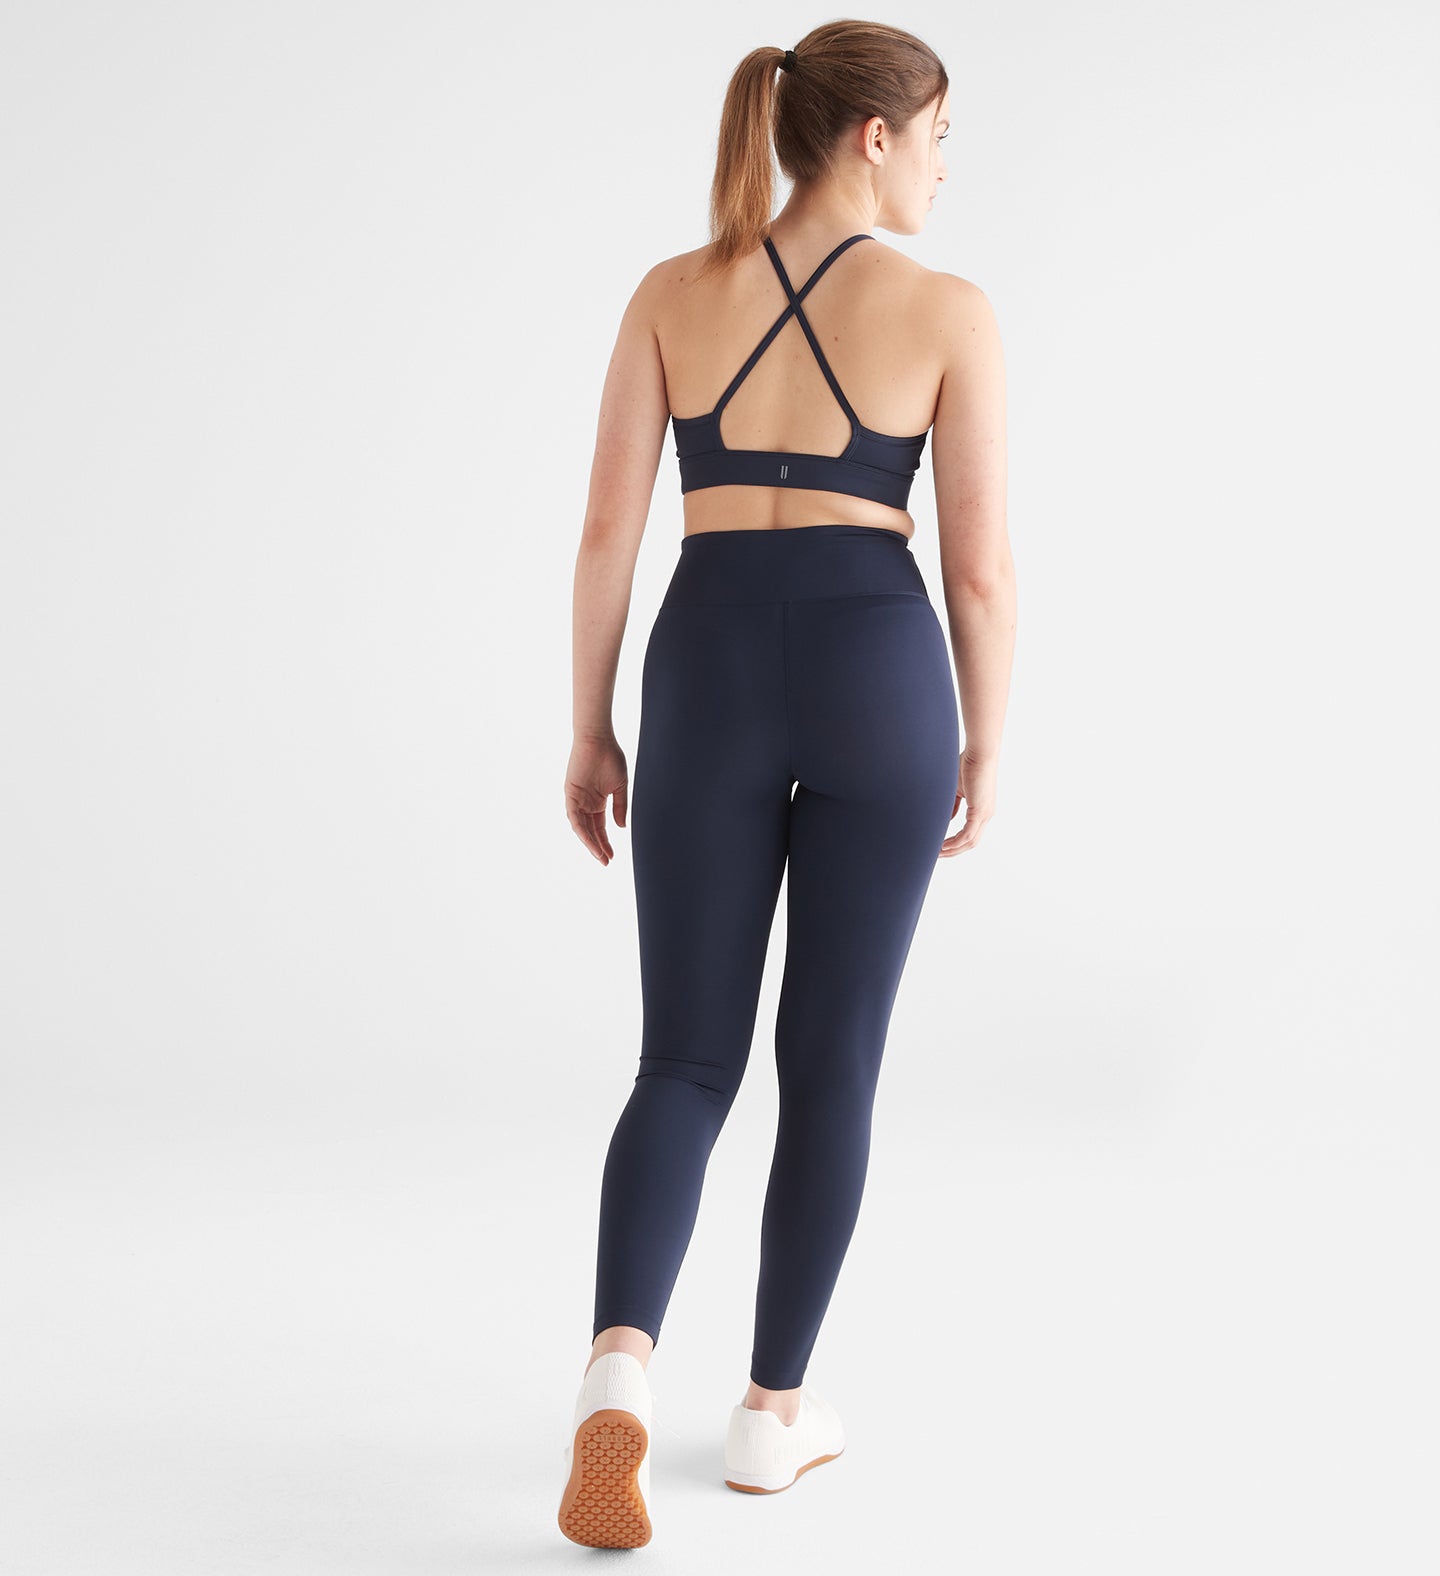 Women's Athletic Apparel & Active Clothing – NOBULL